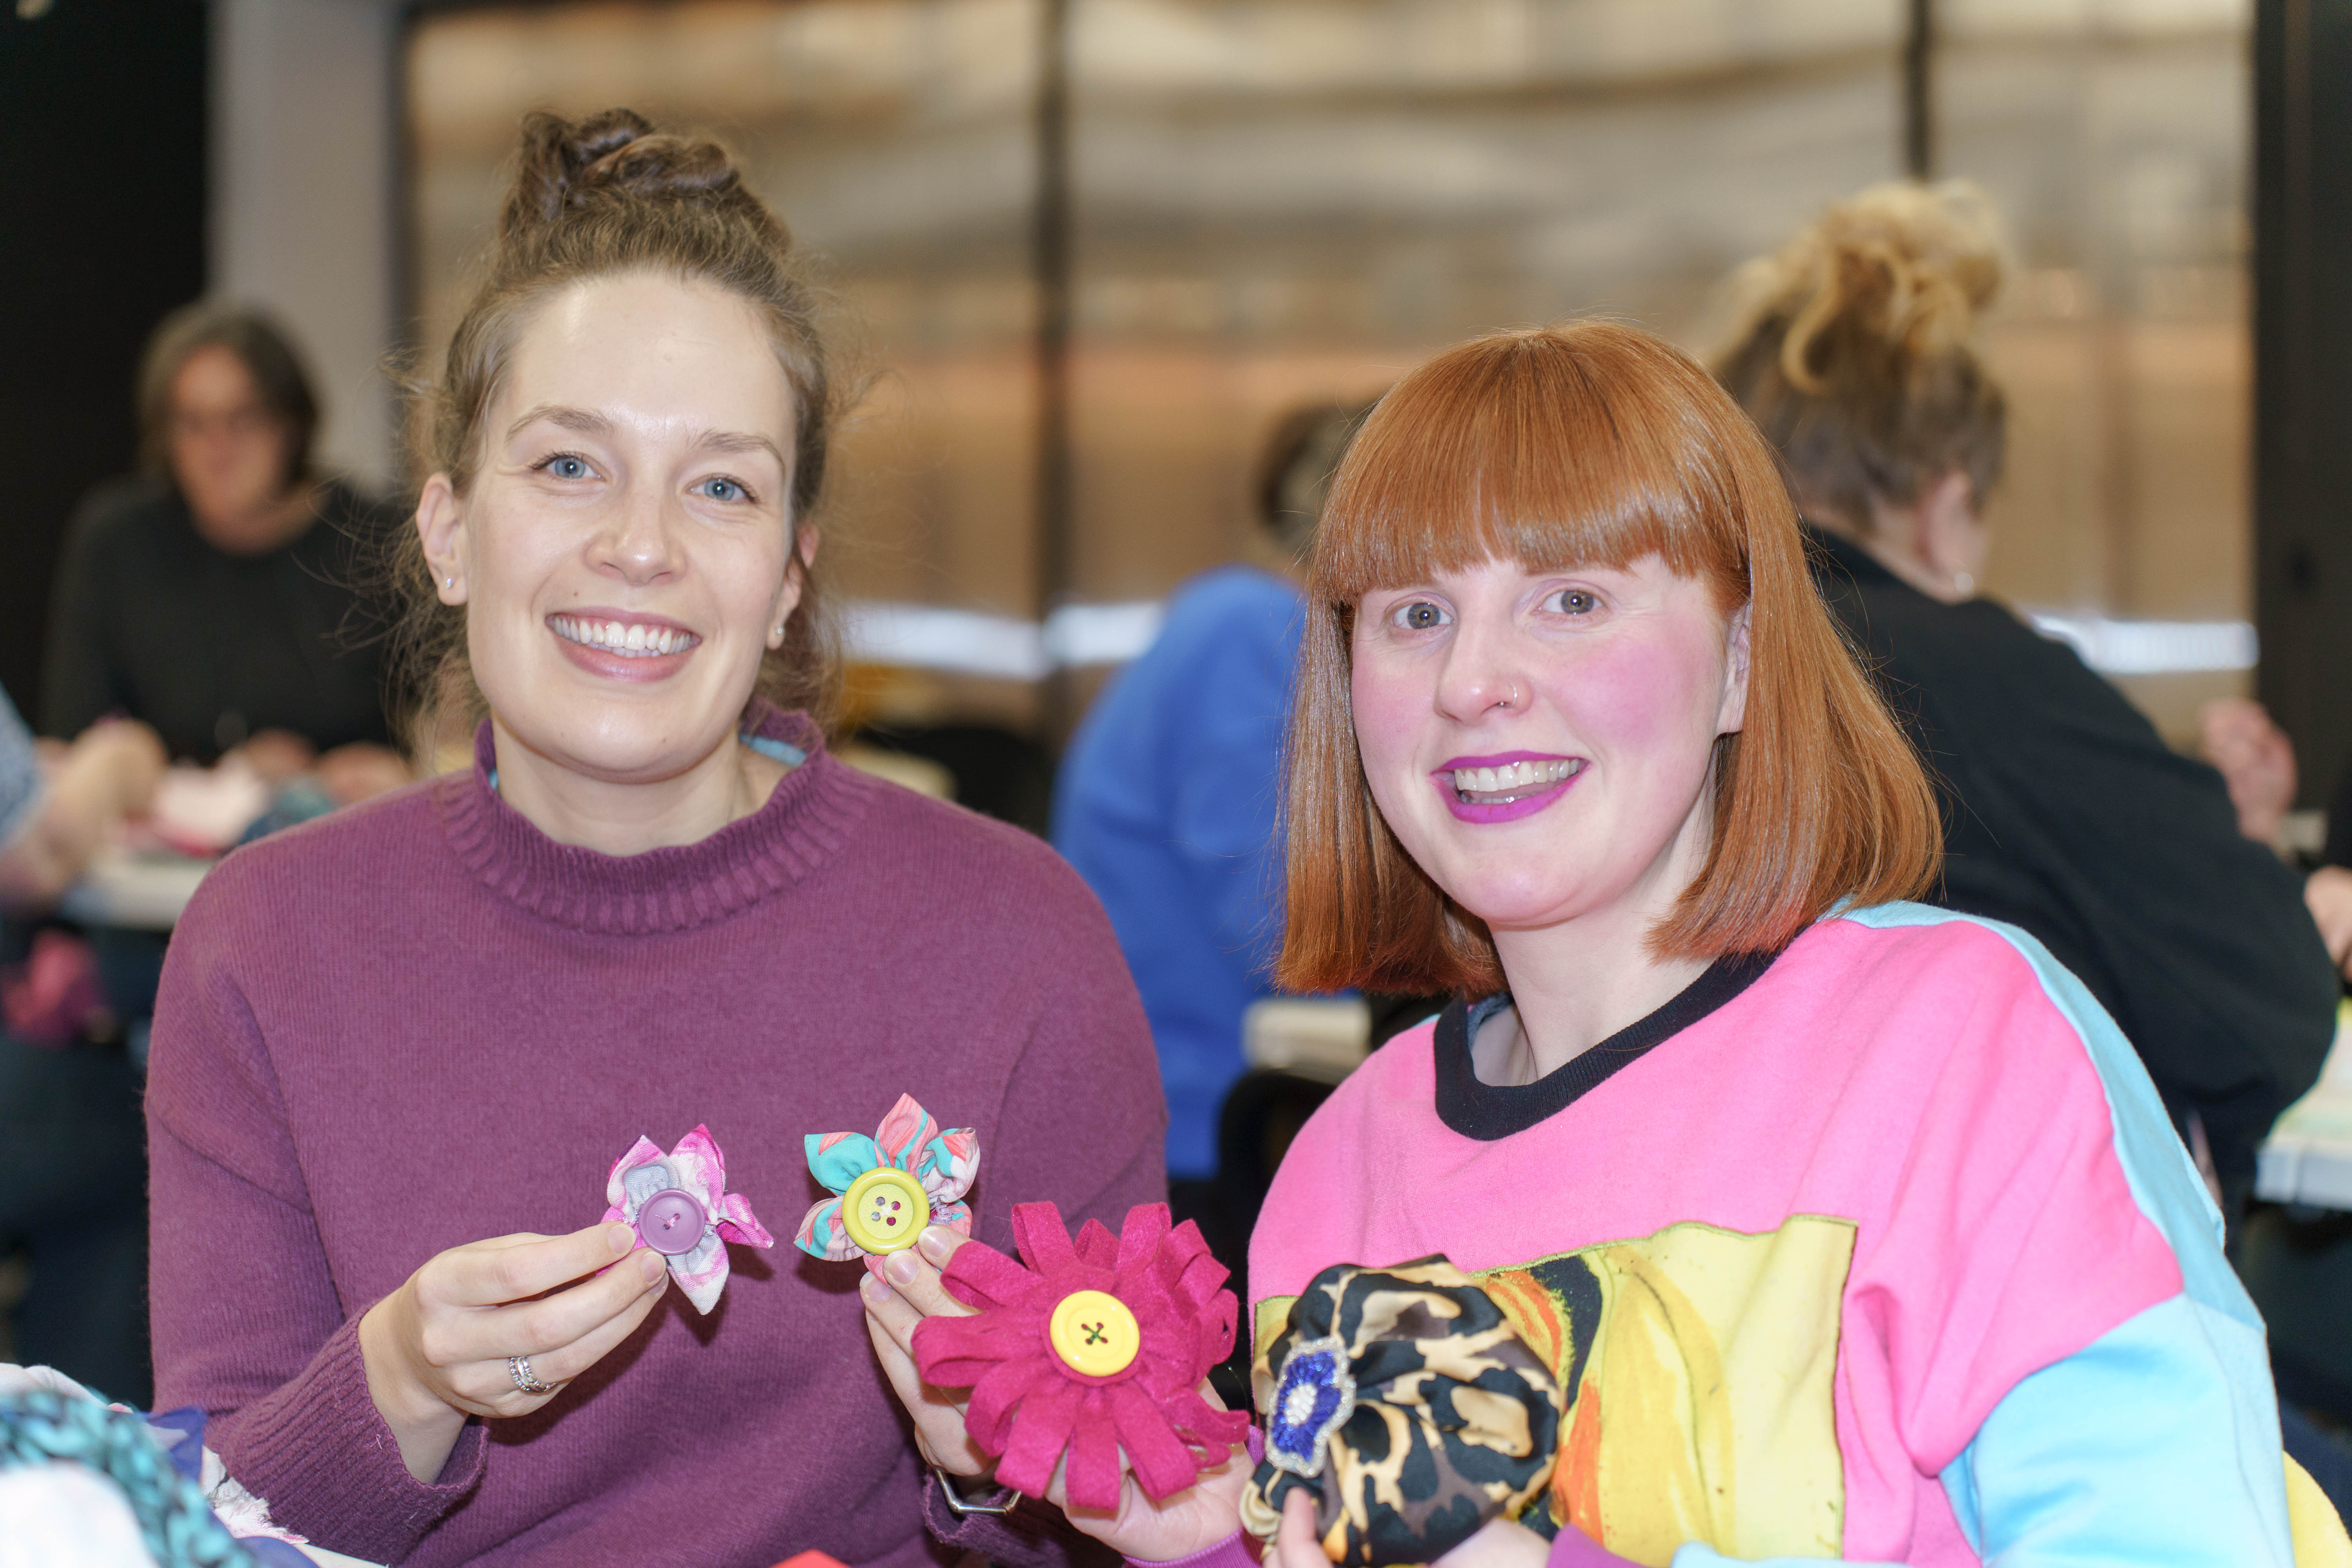 Two women smiling holding crafted flowers.